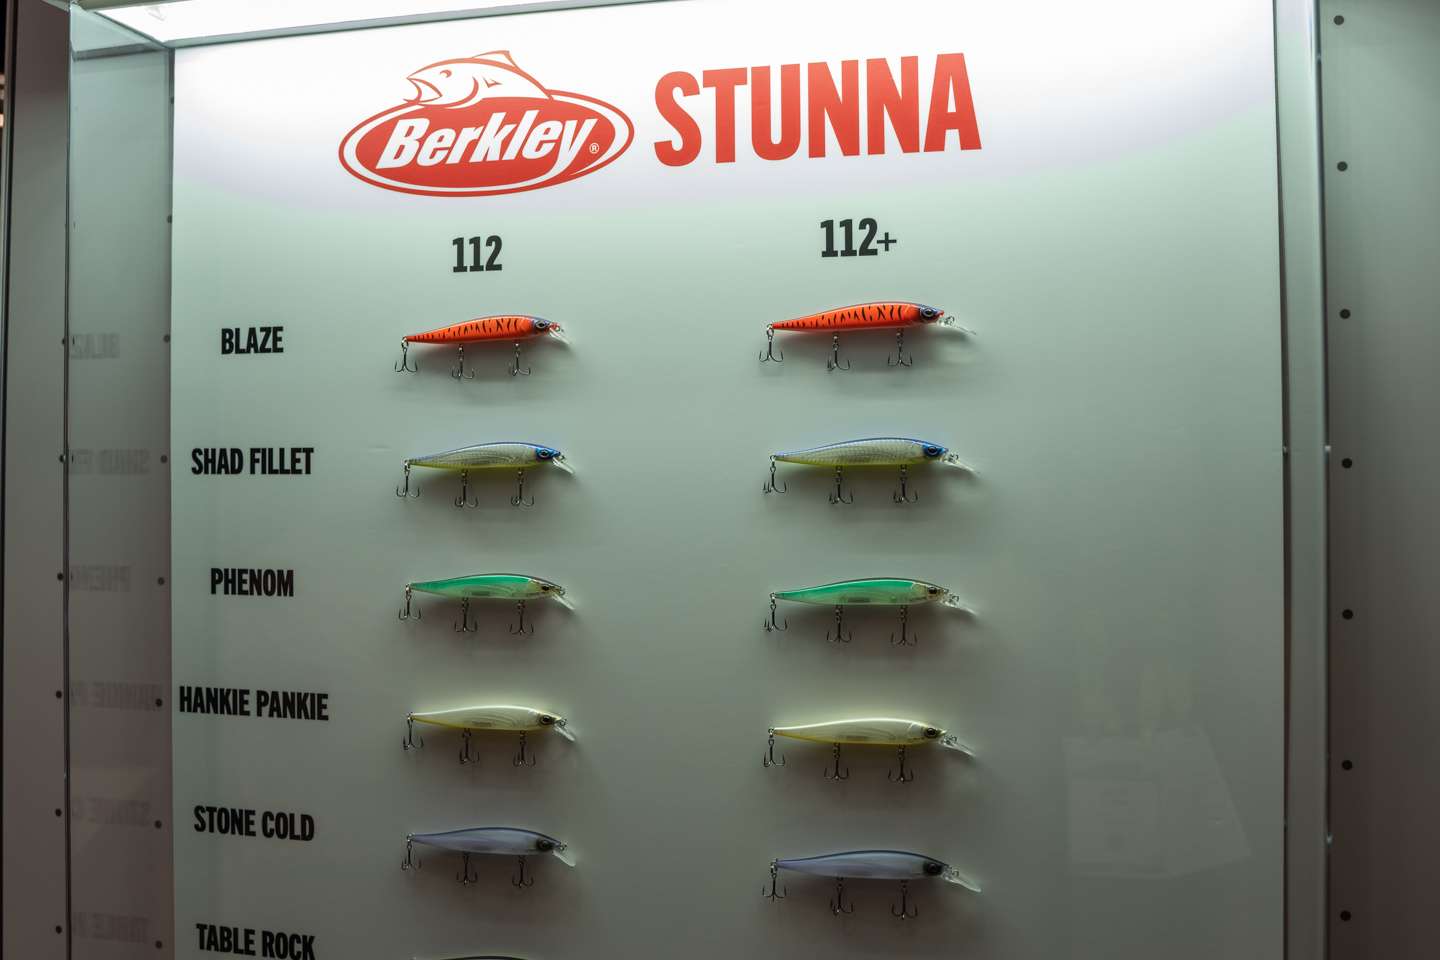 <b>Berkley Stunna Jerkait</b><br>
Hank Cherry put this new jerkbait on the map in a big way in the 2021 Academy Sports + Outdoors Bassmaster Classic presented by Huk. 